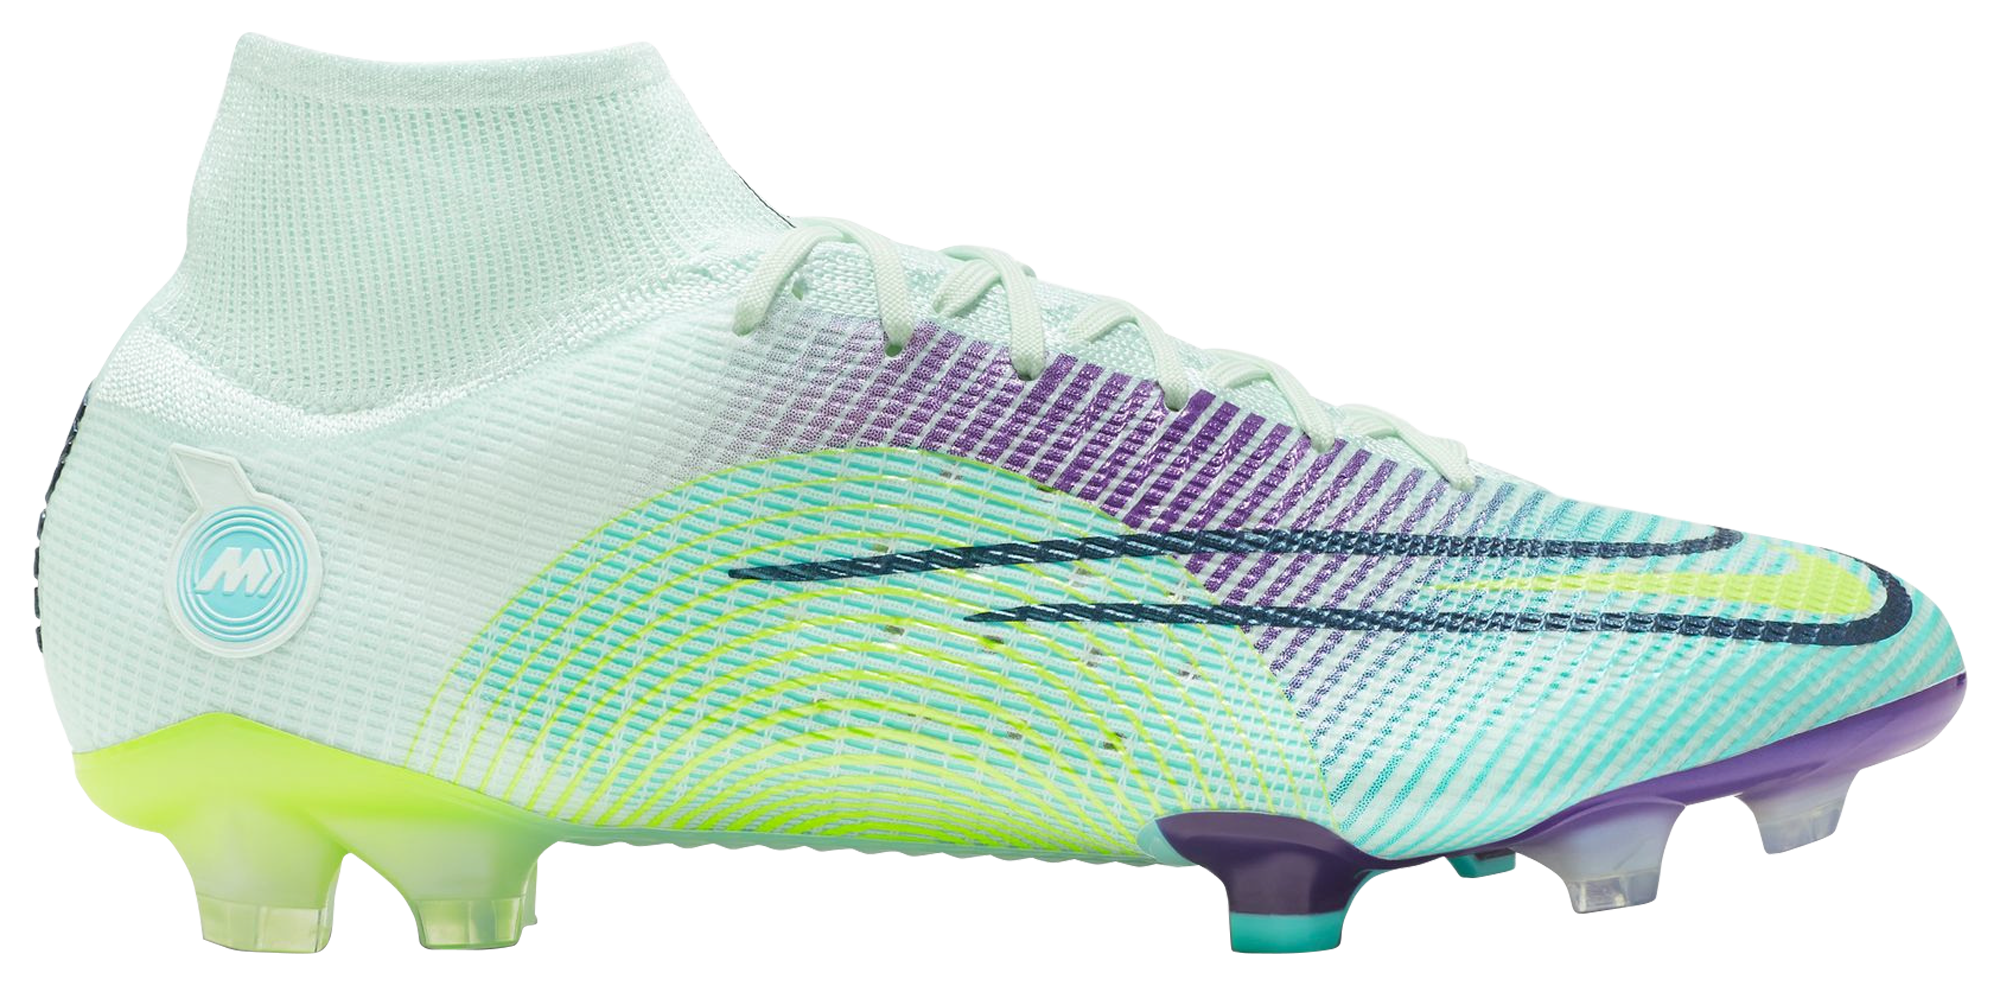 90 28 10. Nike Mercurial Superfly 7 Elite MDS FG "Dream Speed". Nike Mercurial Vapor 14 Elite FG 'Dream Speed - barely Green Electro Purple'. Mbappe бутсы 2022 Gold.